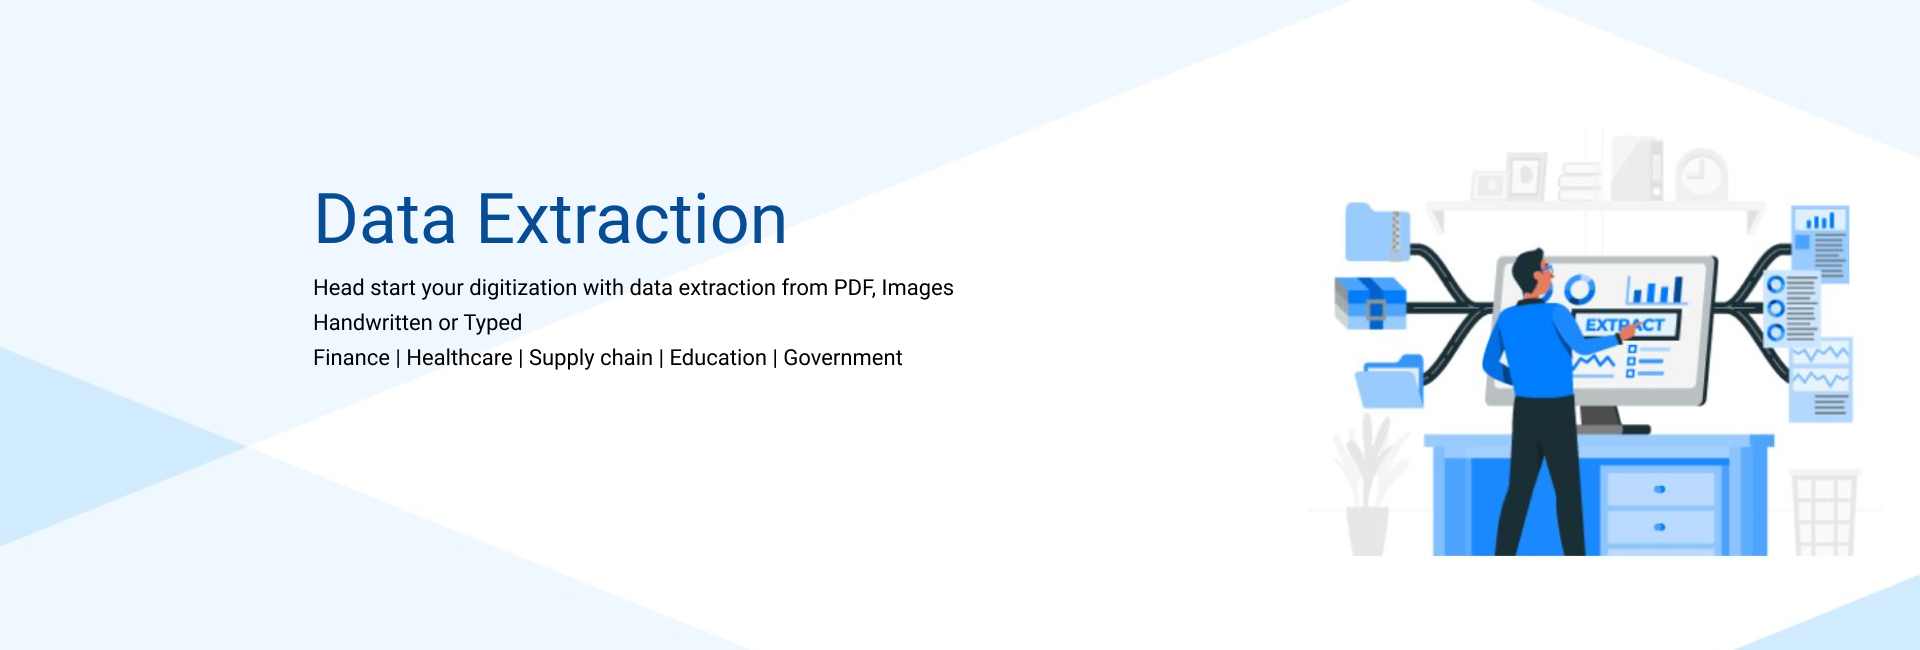 Head start your Digitalization with data extraction from PDFs, Images.Both typed and handwritten